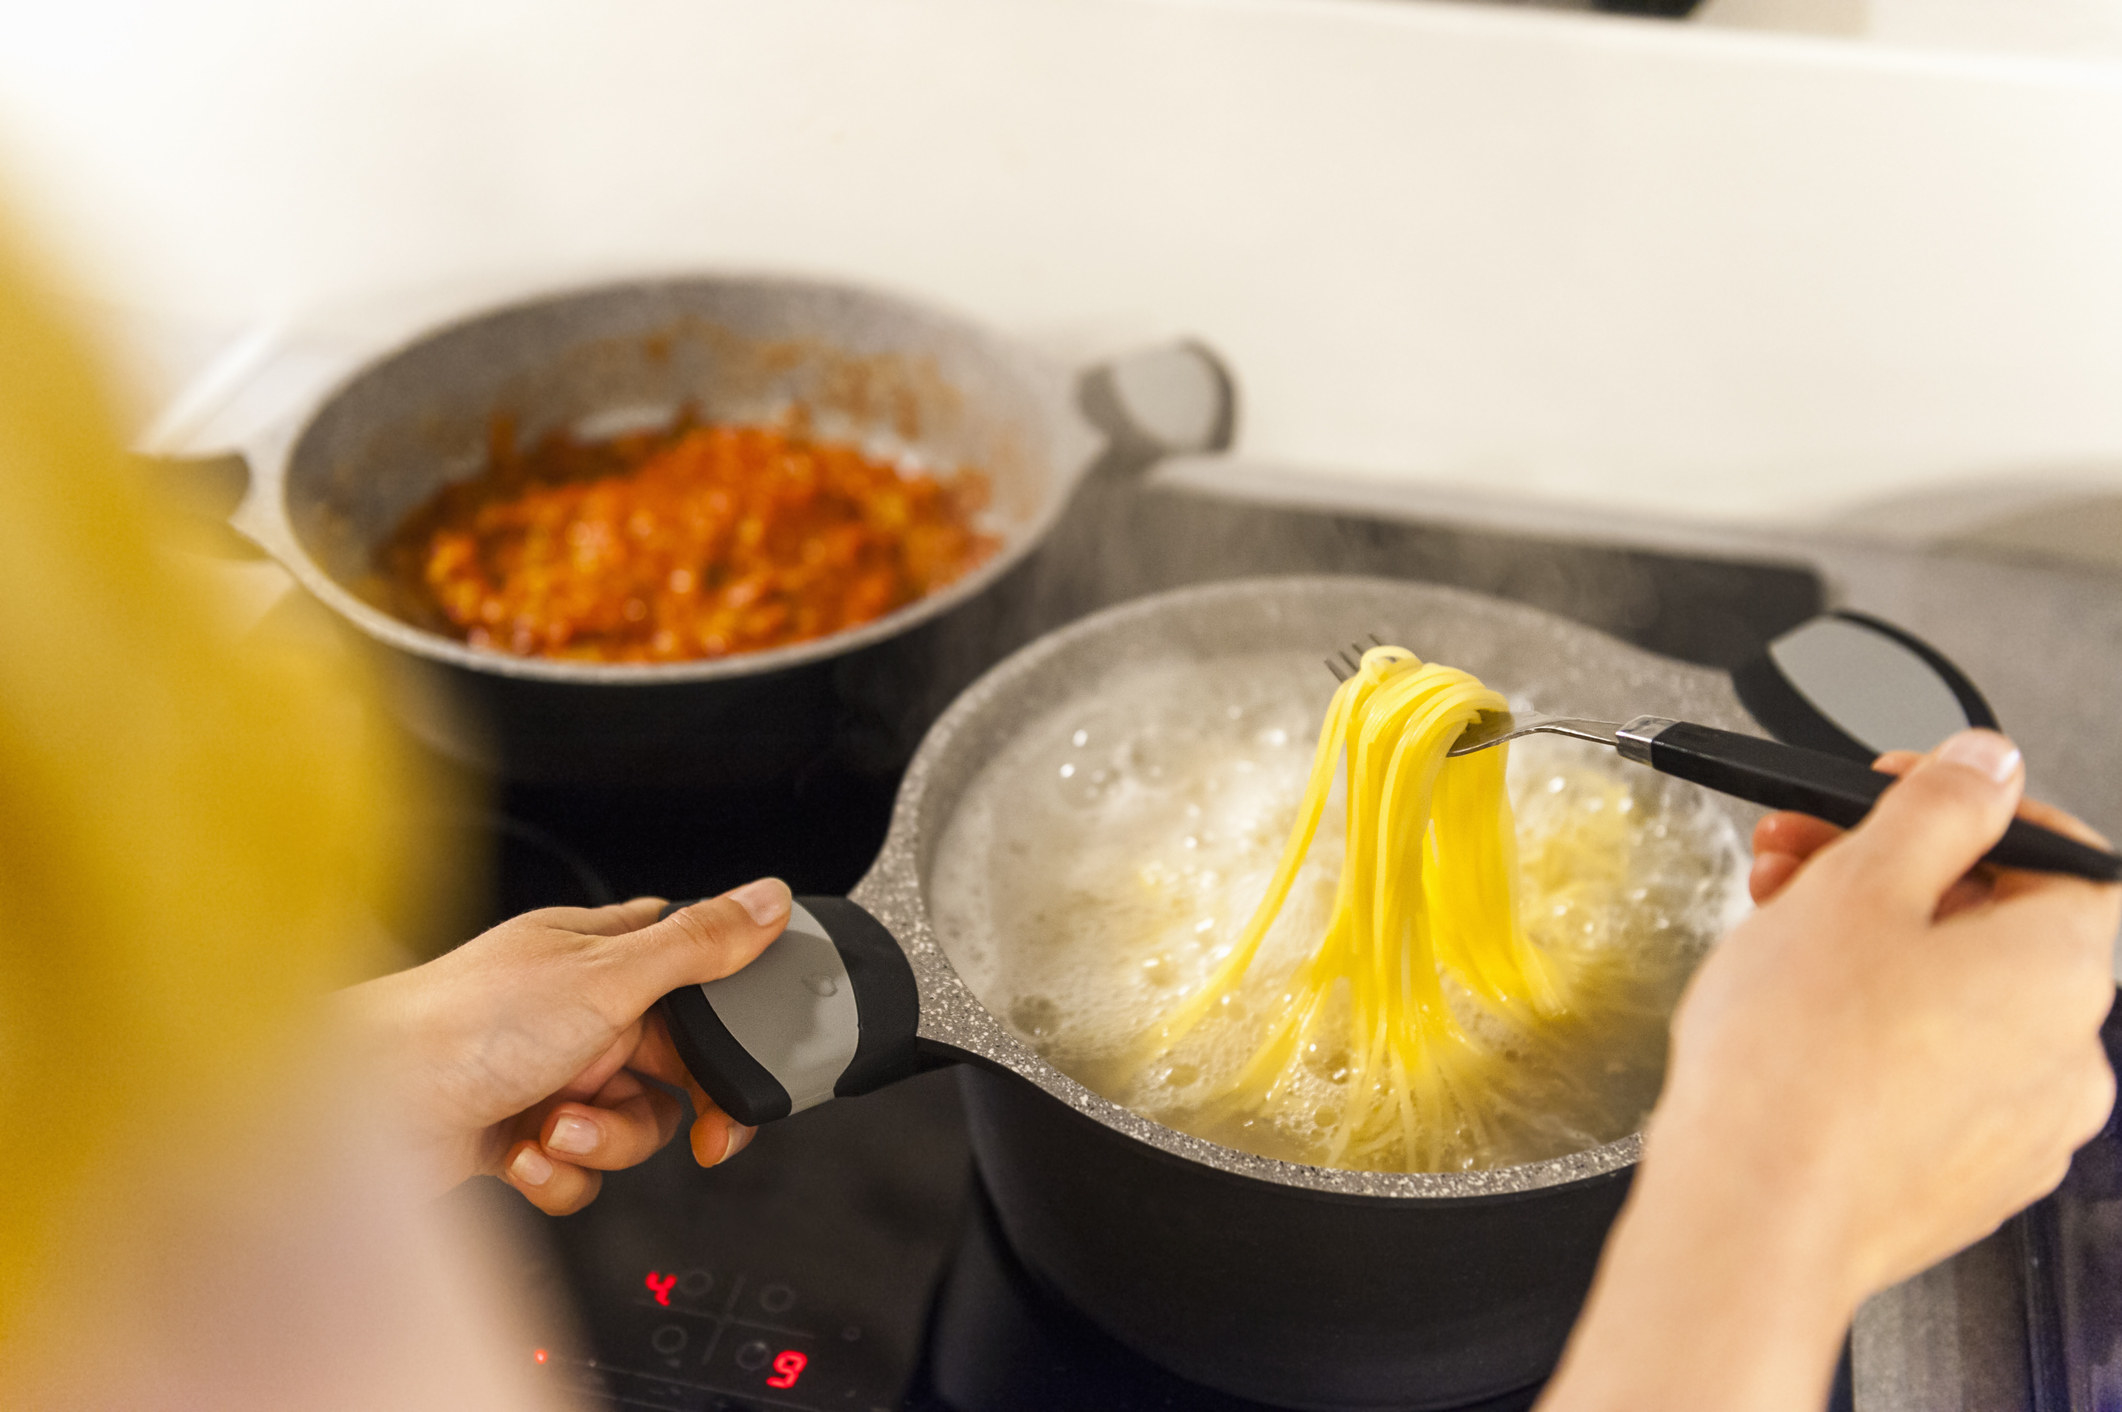 A woman preparing spaghetti with meat sauce.